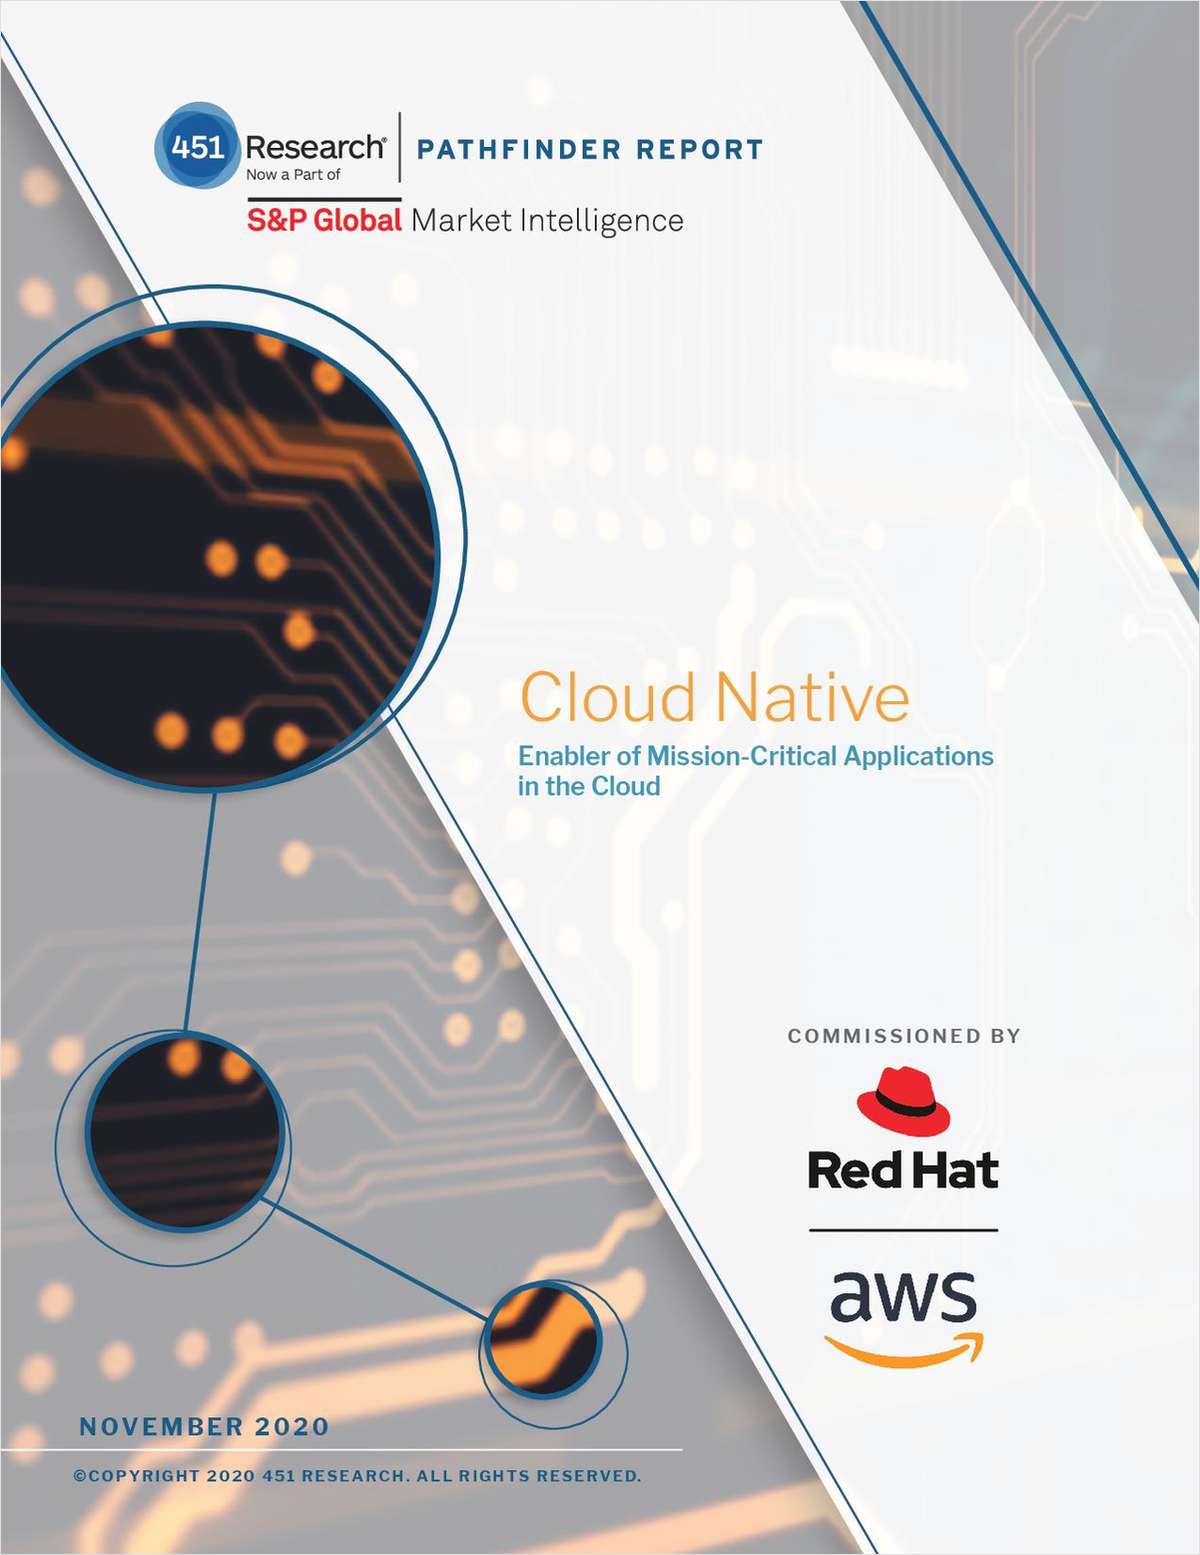 Cloud Native - Enabler of Mission-Critical Applications in the Cloud